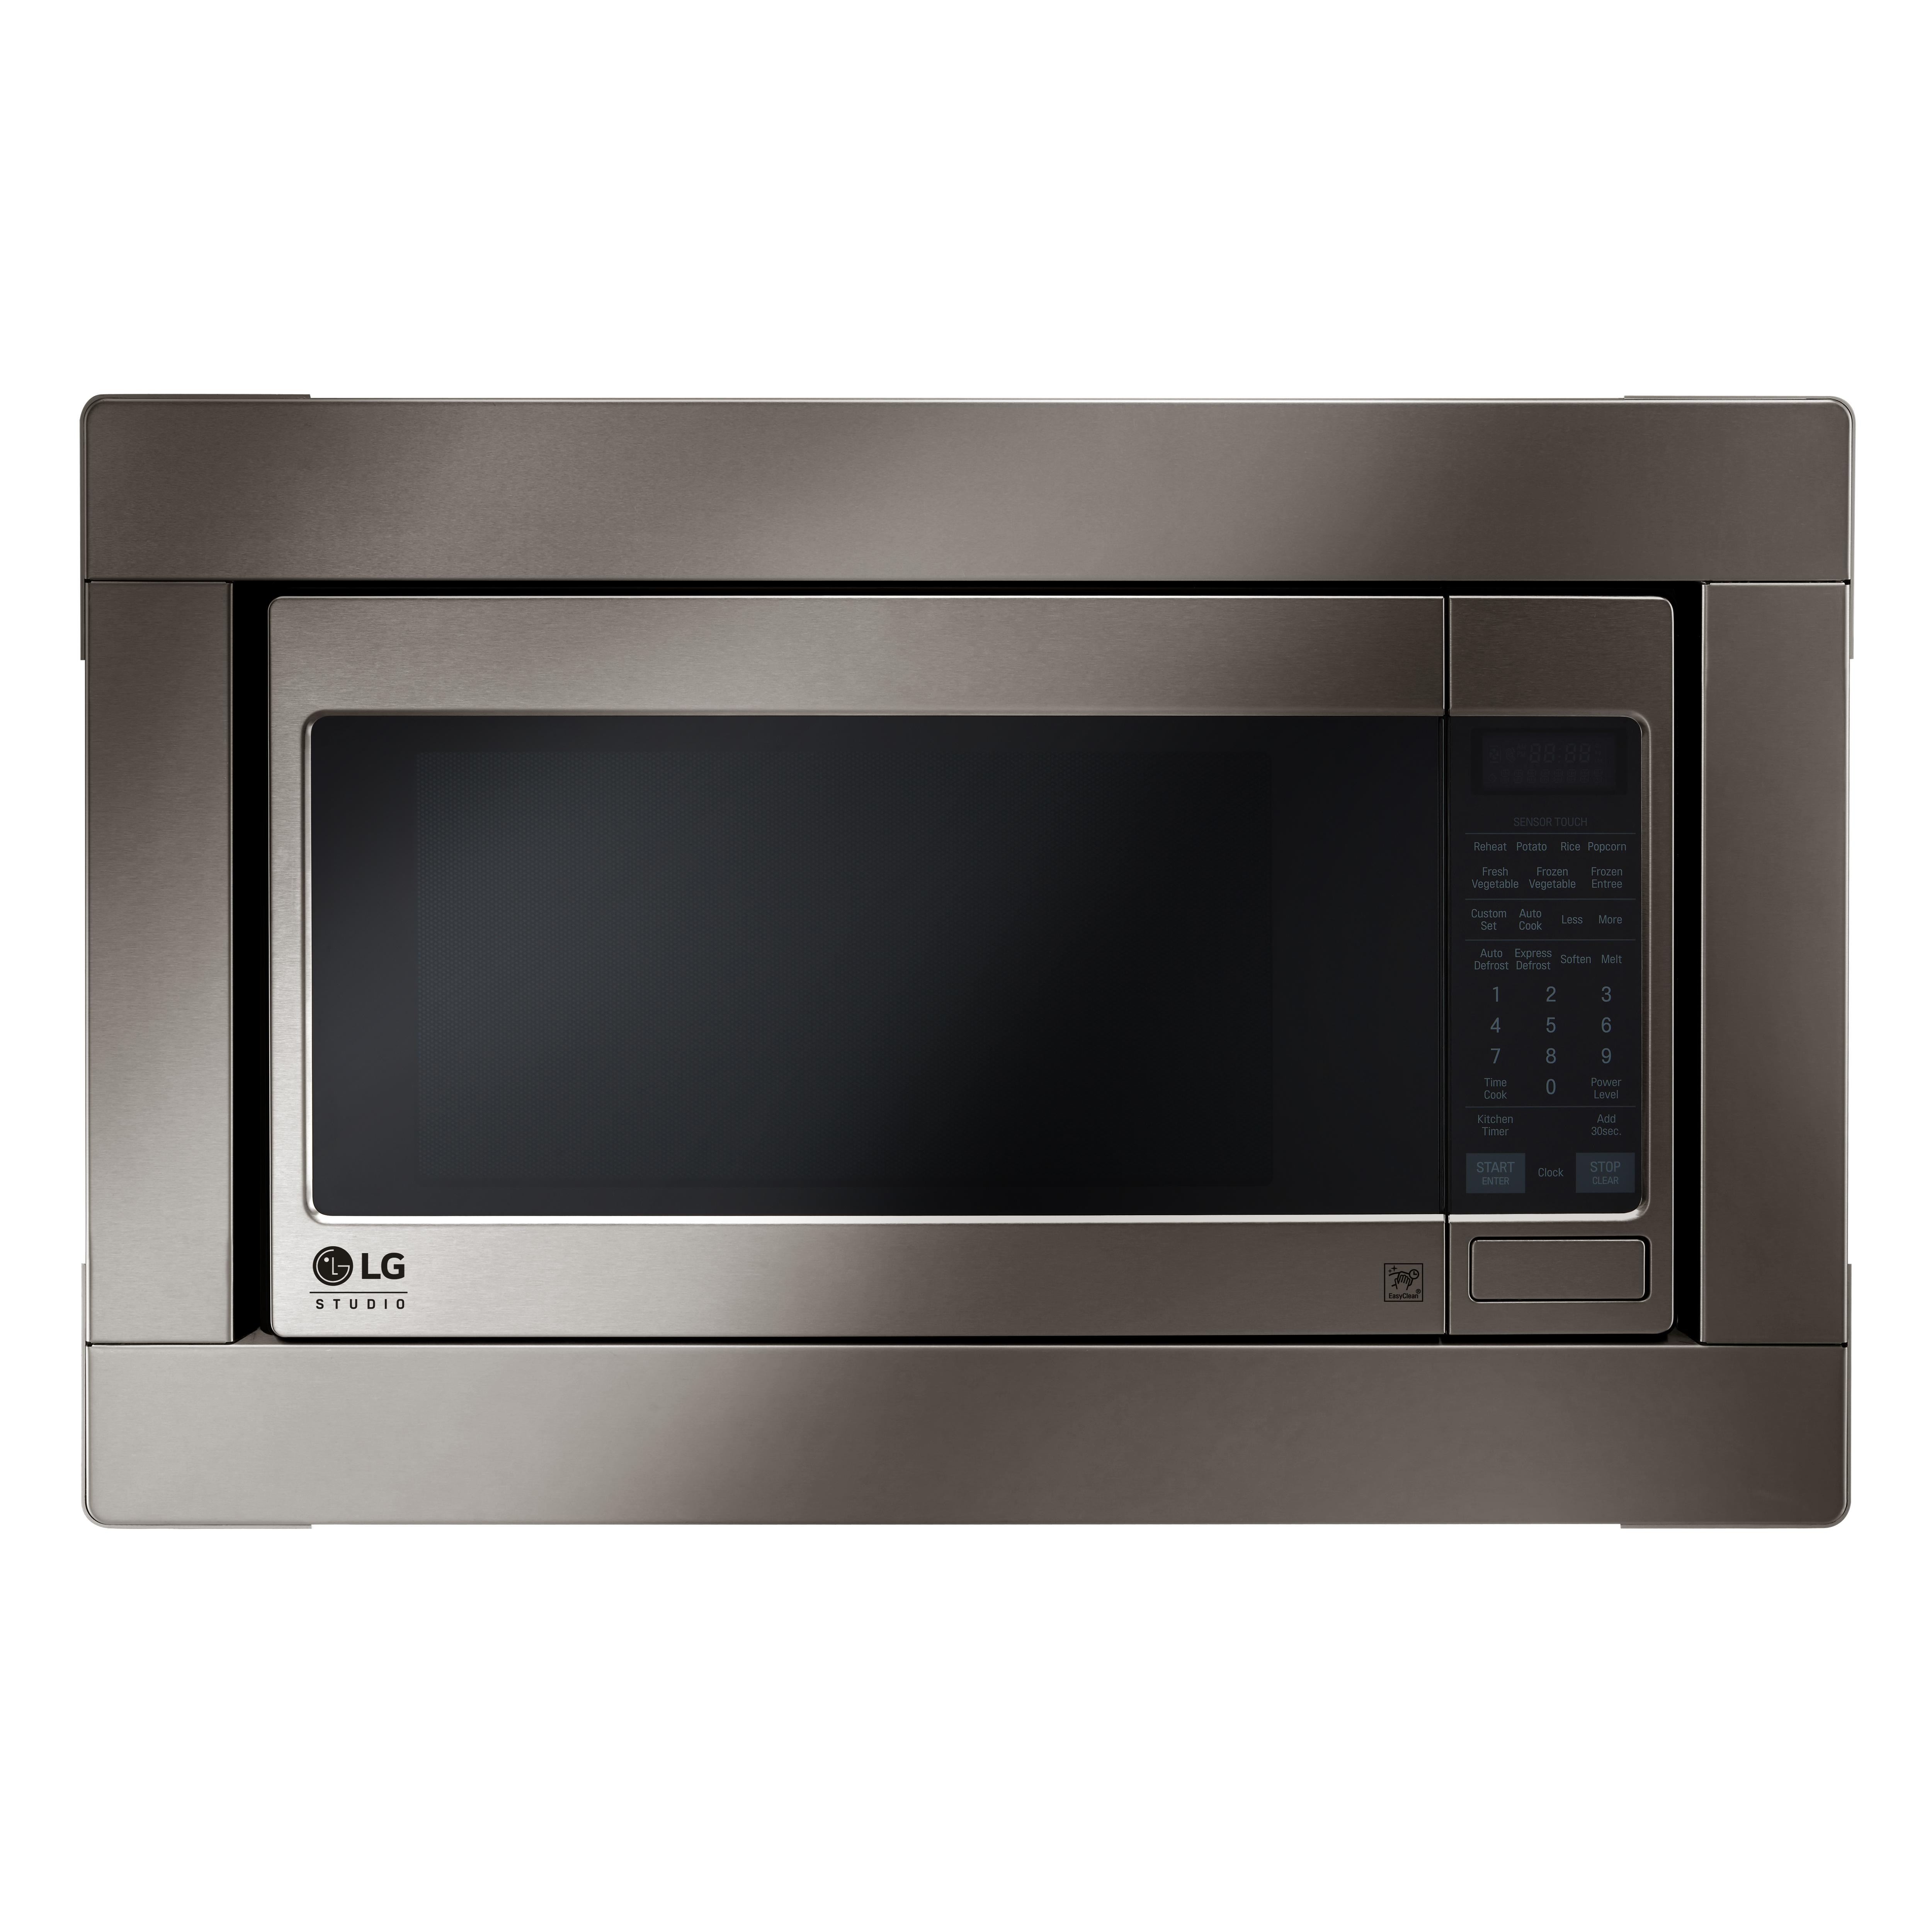 LG LSRM2010BD LG STUDIO 2.0 cu. ft. Countertop Microwave Oven with